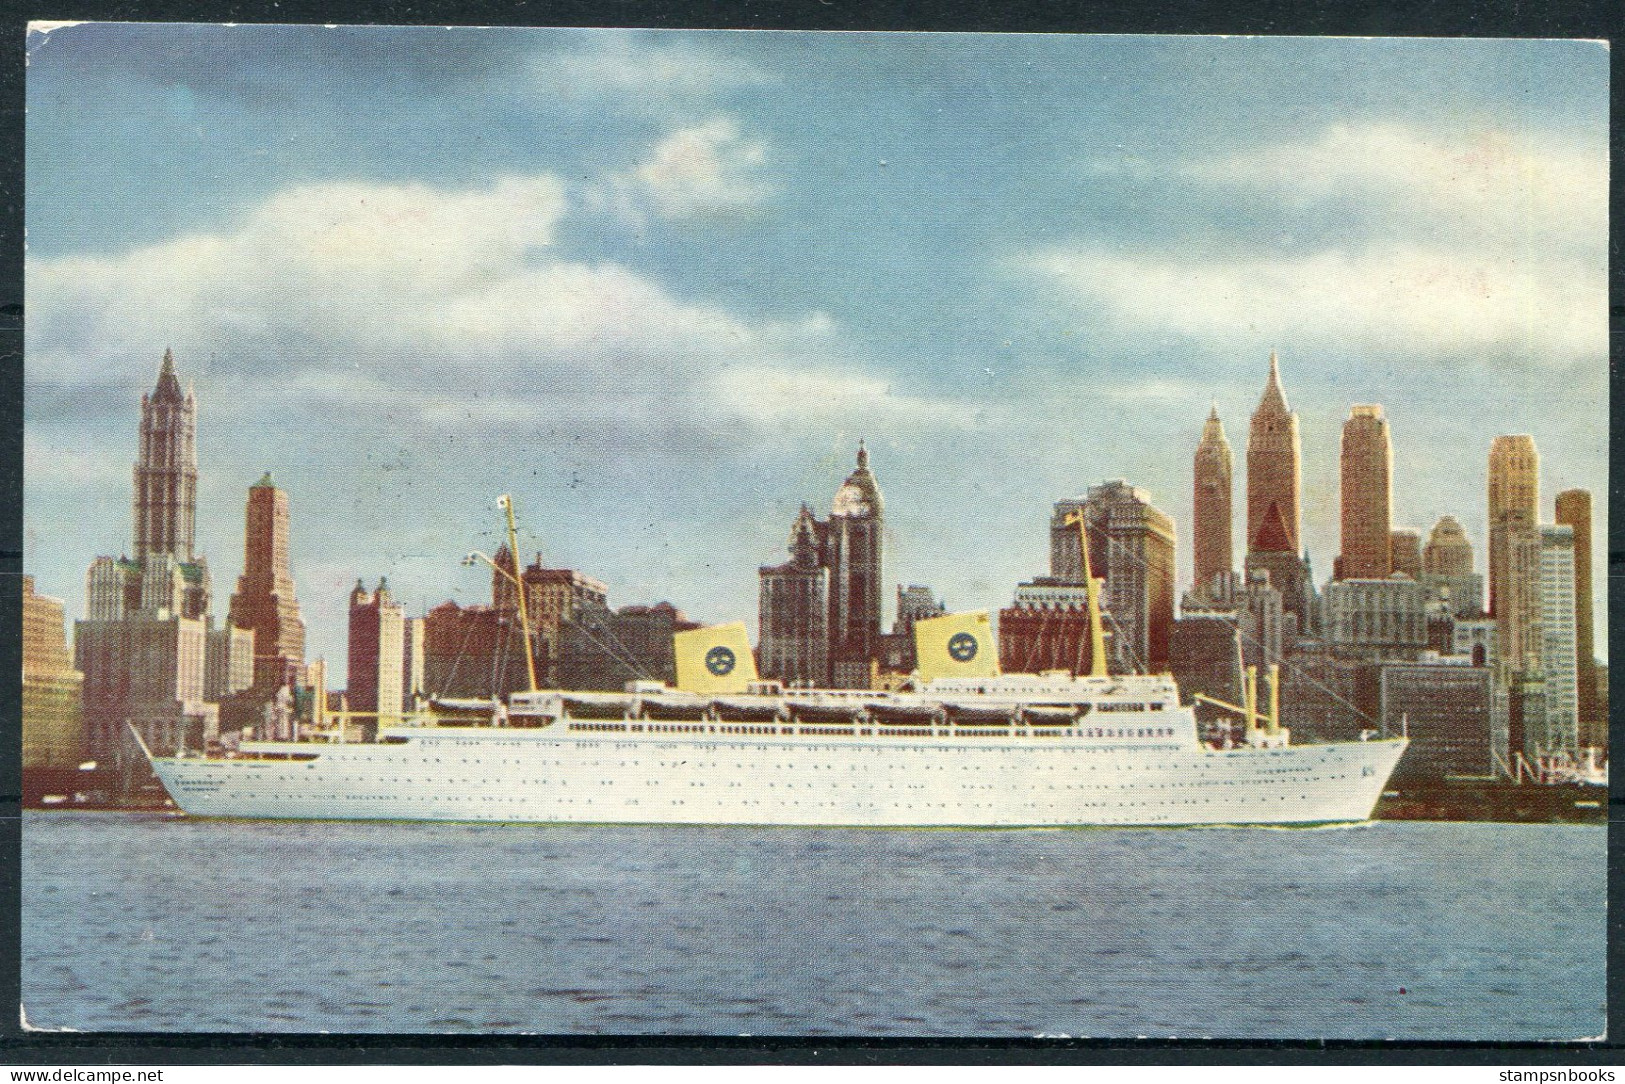 1957 Sweden Swedish American Line Postcard MS GRIPSHOLM "Cruise Around South America"  - Covers & Documents